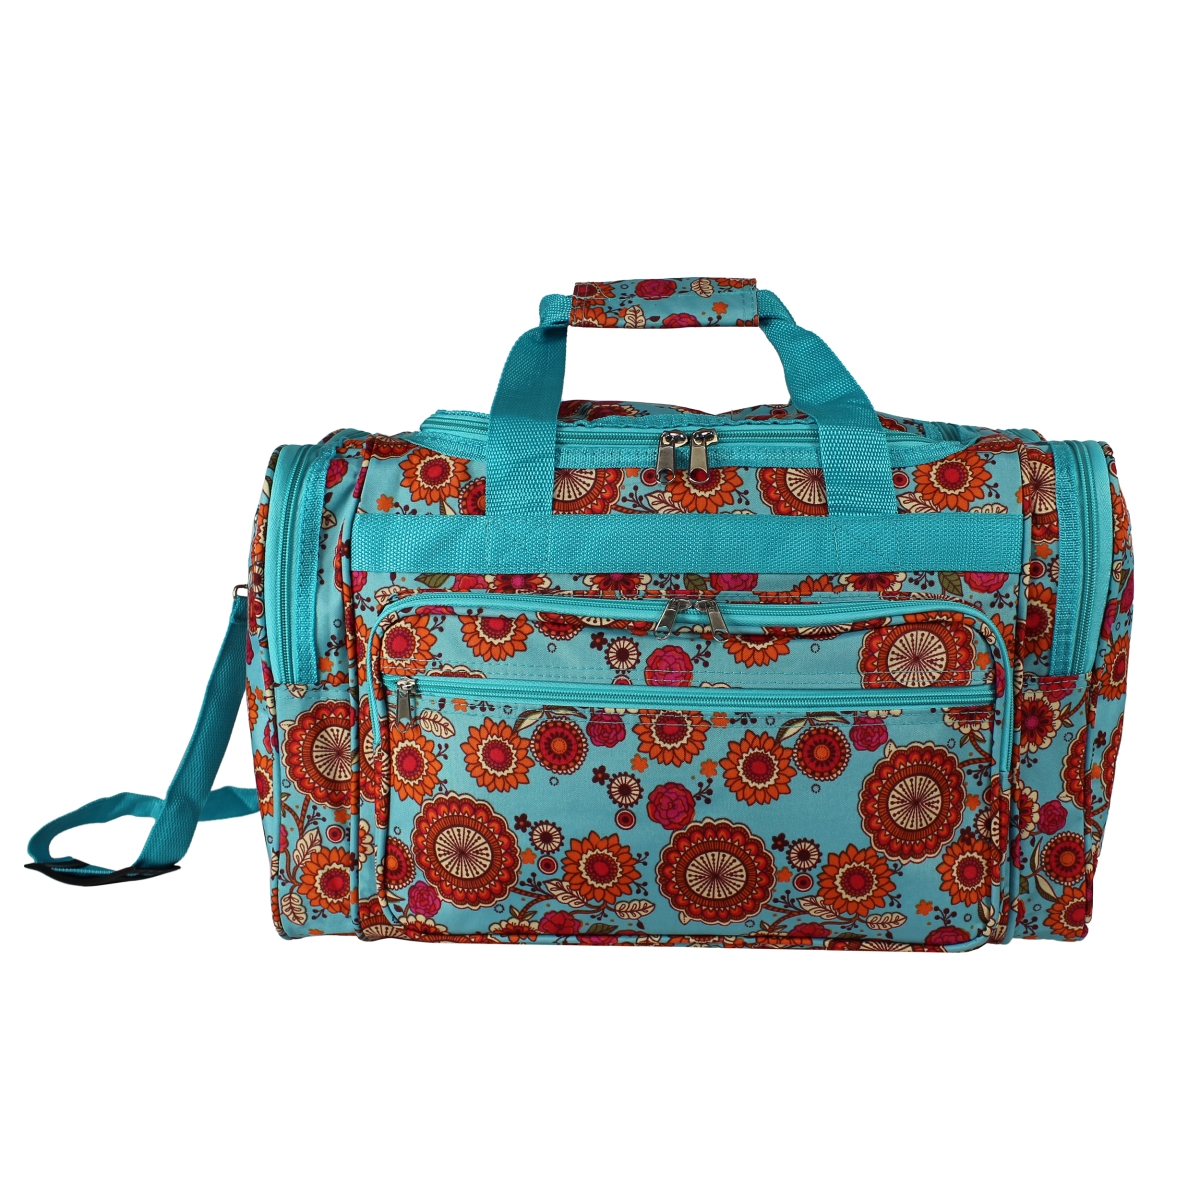 81t19-231 19 In. Carry-on Duffel Bag - Wildflowers